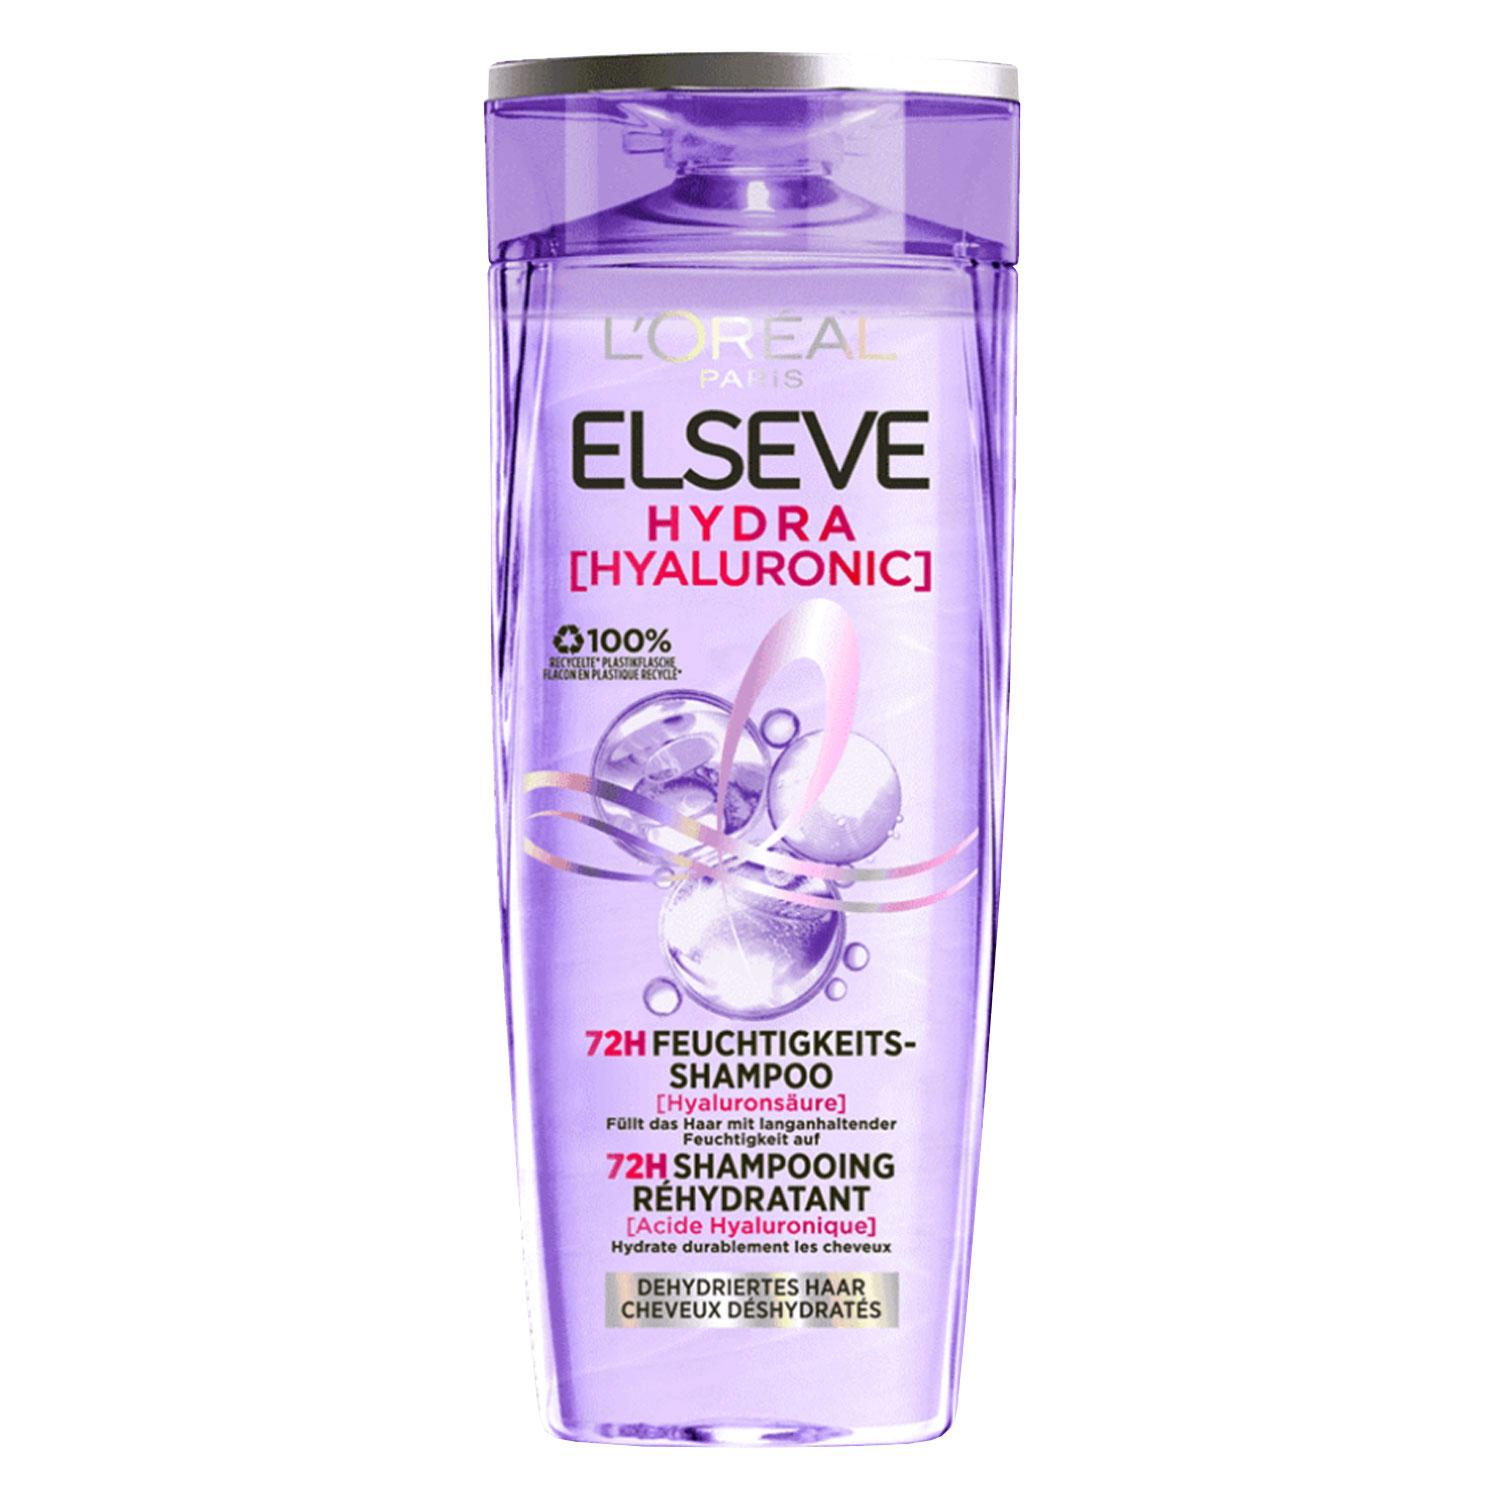 LOréal Elseve Haircare - Hydra Hyaluronic 72H Feuchtigkeits-Shampoo